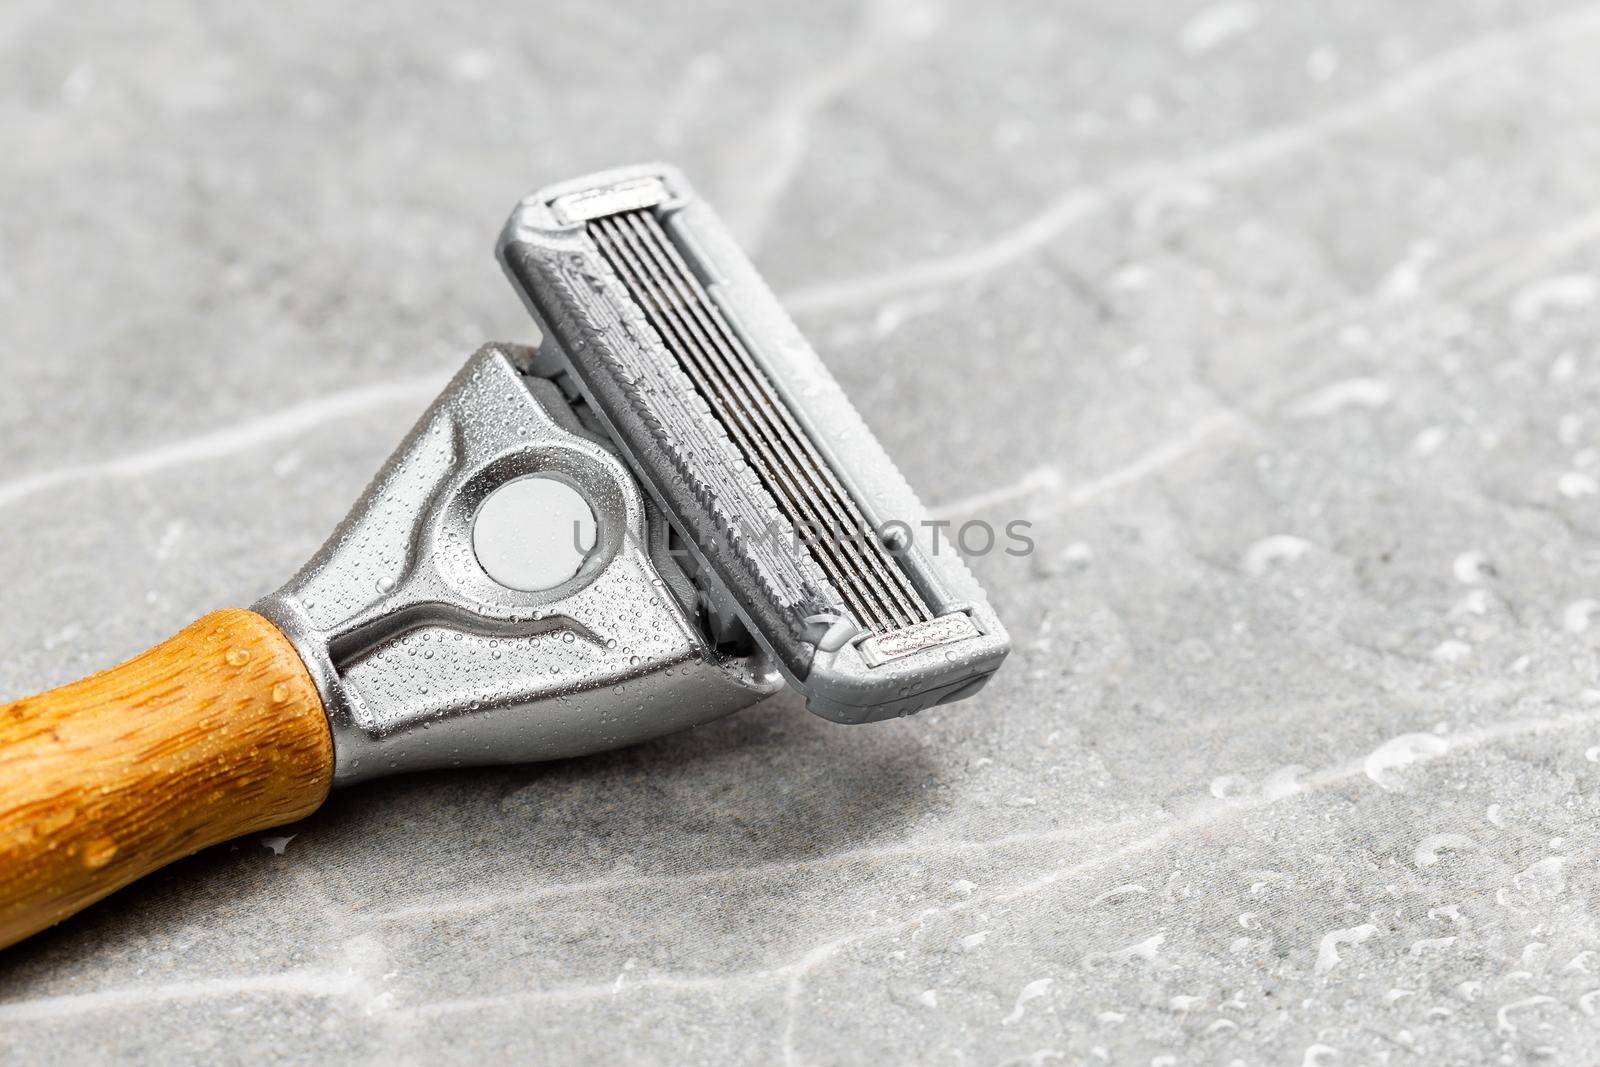 Wet shaving Razor with five blades head and wooden handle on a grey marble background. Macro shot